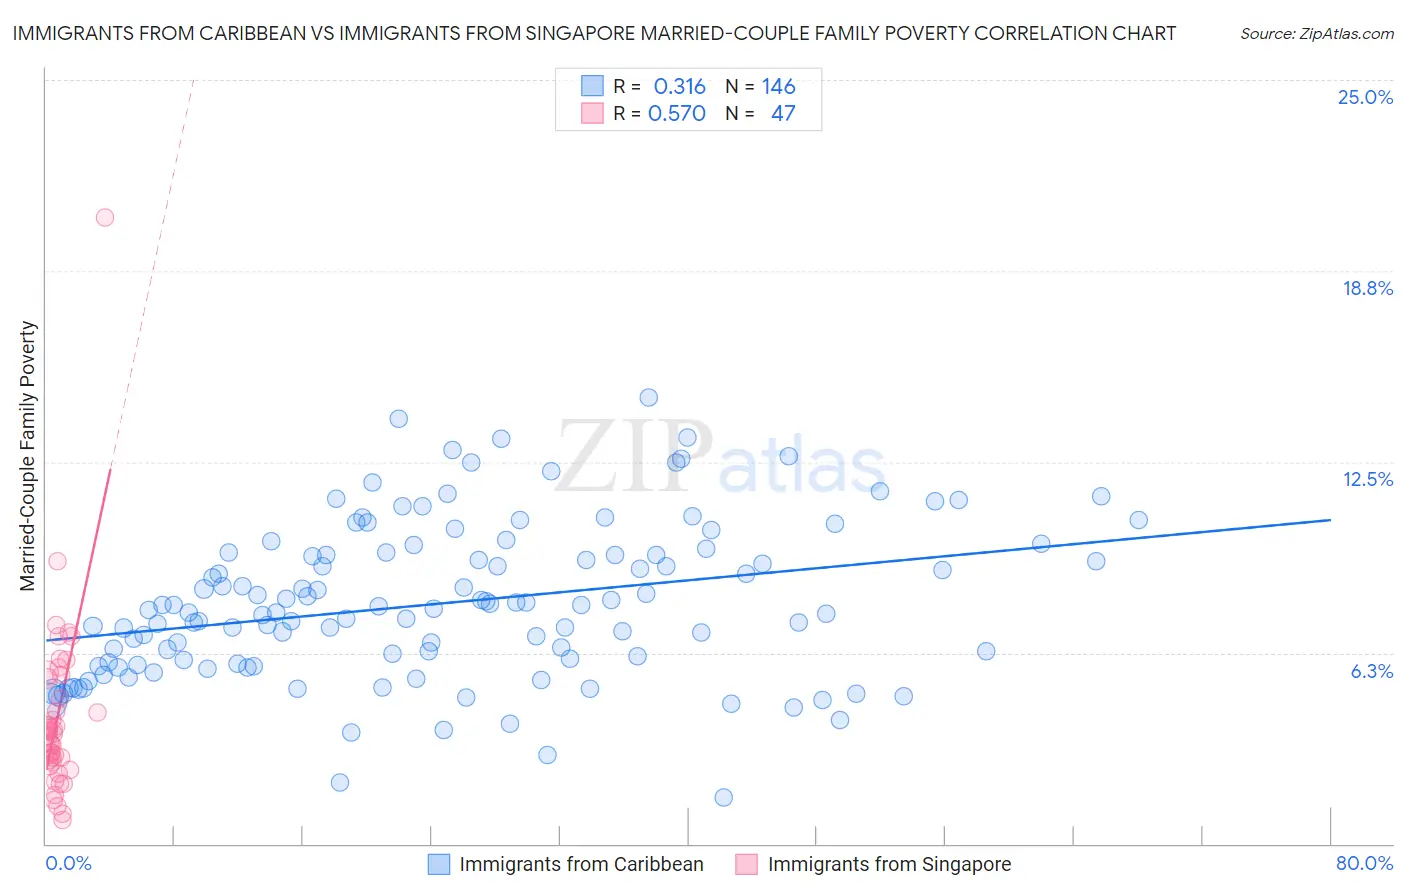 Immigrants from Caribbean vs Immigrants from Singapore Married-Couple Family Poverty